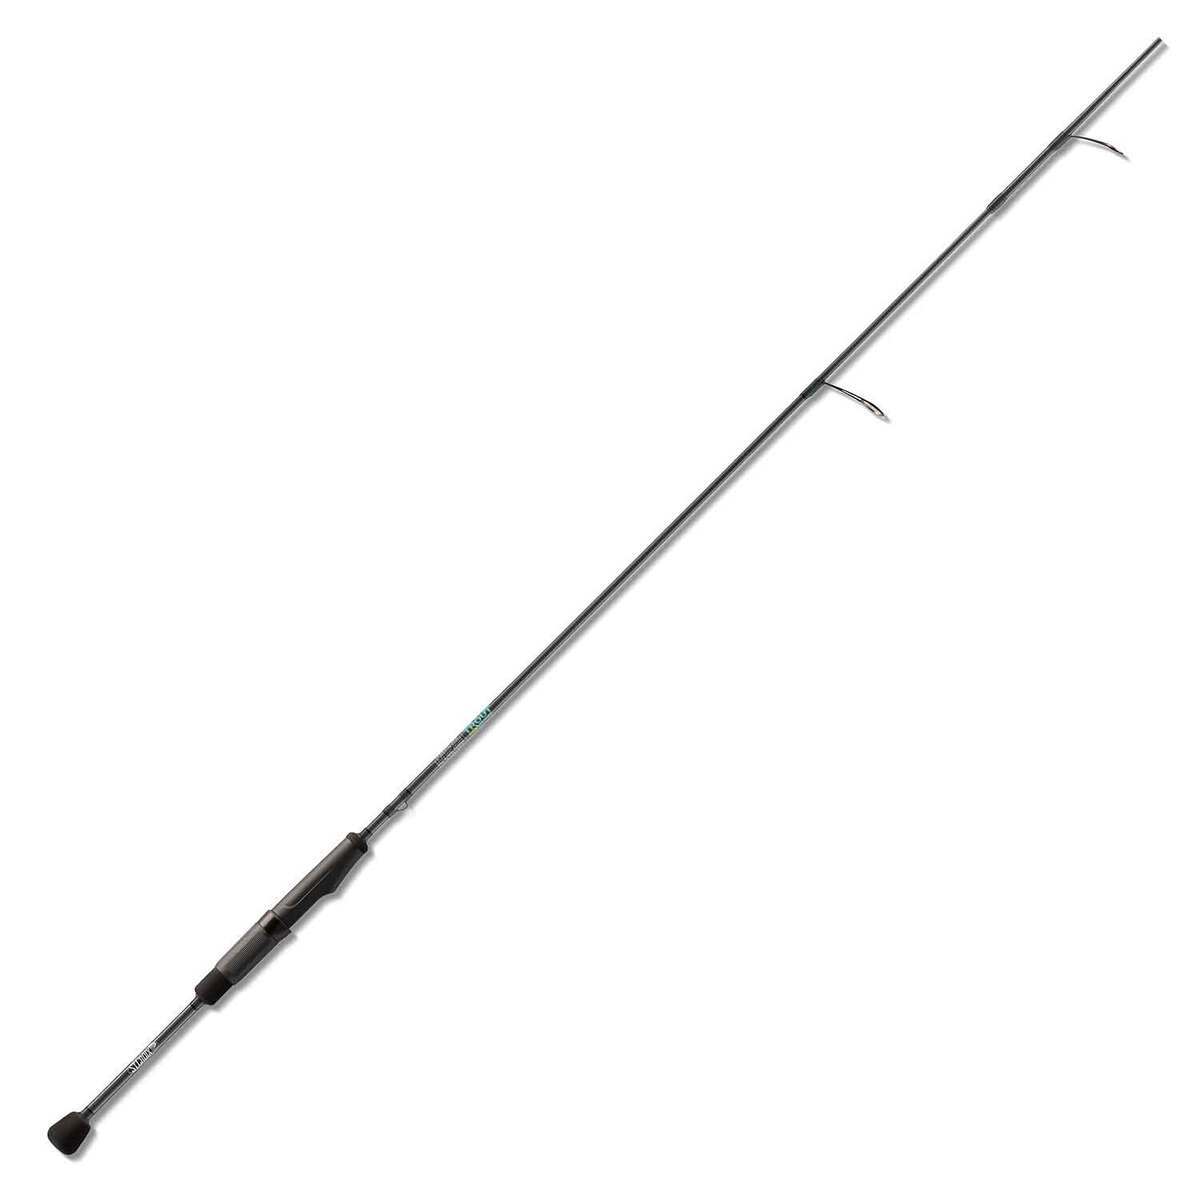 St. Croix Trout Series Spinning Rods - Tackle Shack